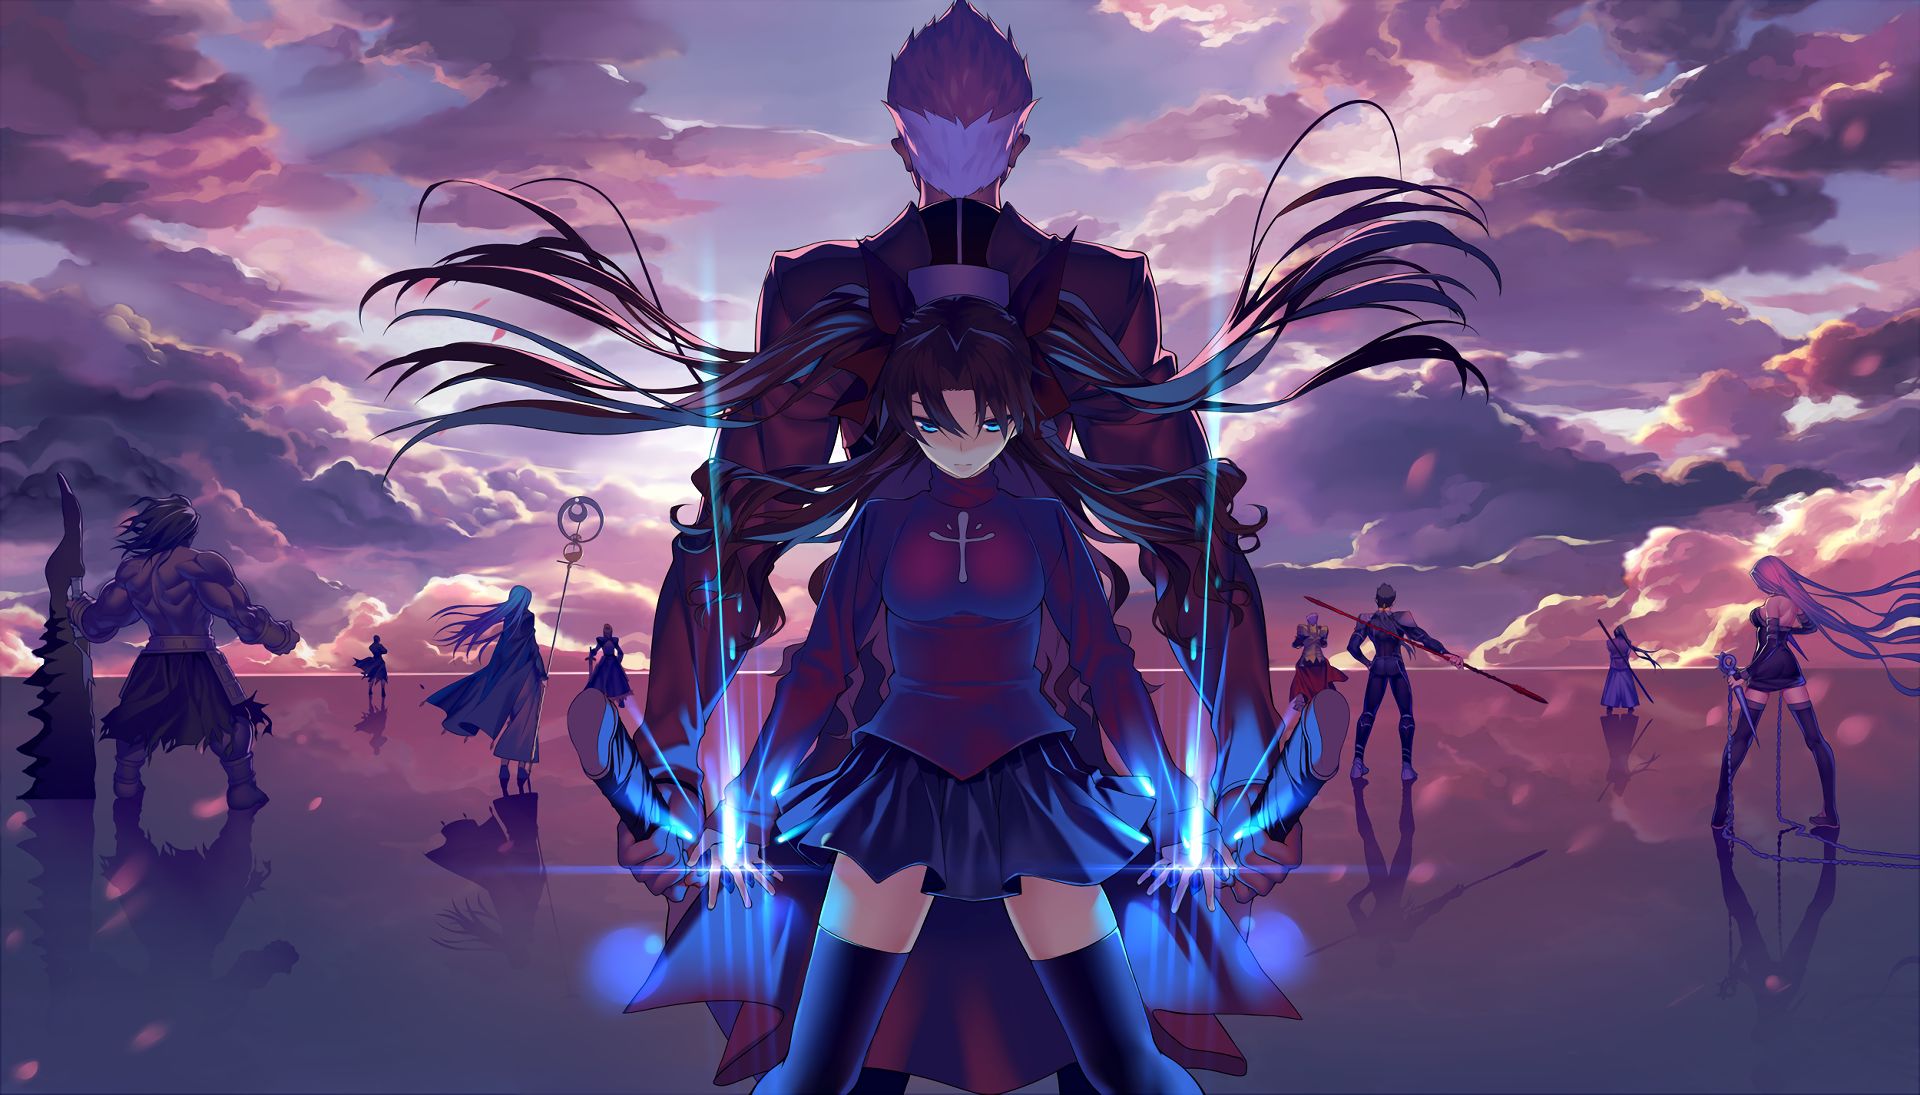 fate series, anime, skirt, rin tohsaka, blue eyes, cloud, sword, reflection, fate/stay night: unlimited blade works, archer (fate/stay night), staff, thigh highs, weapon QHD